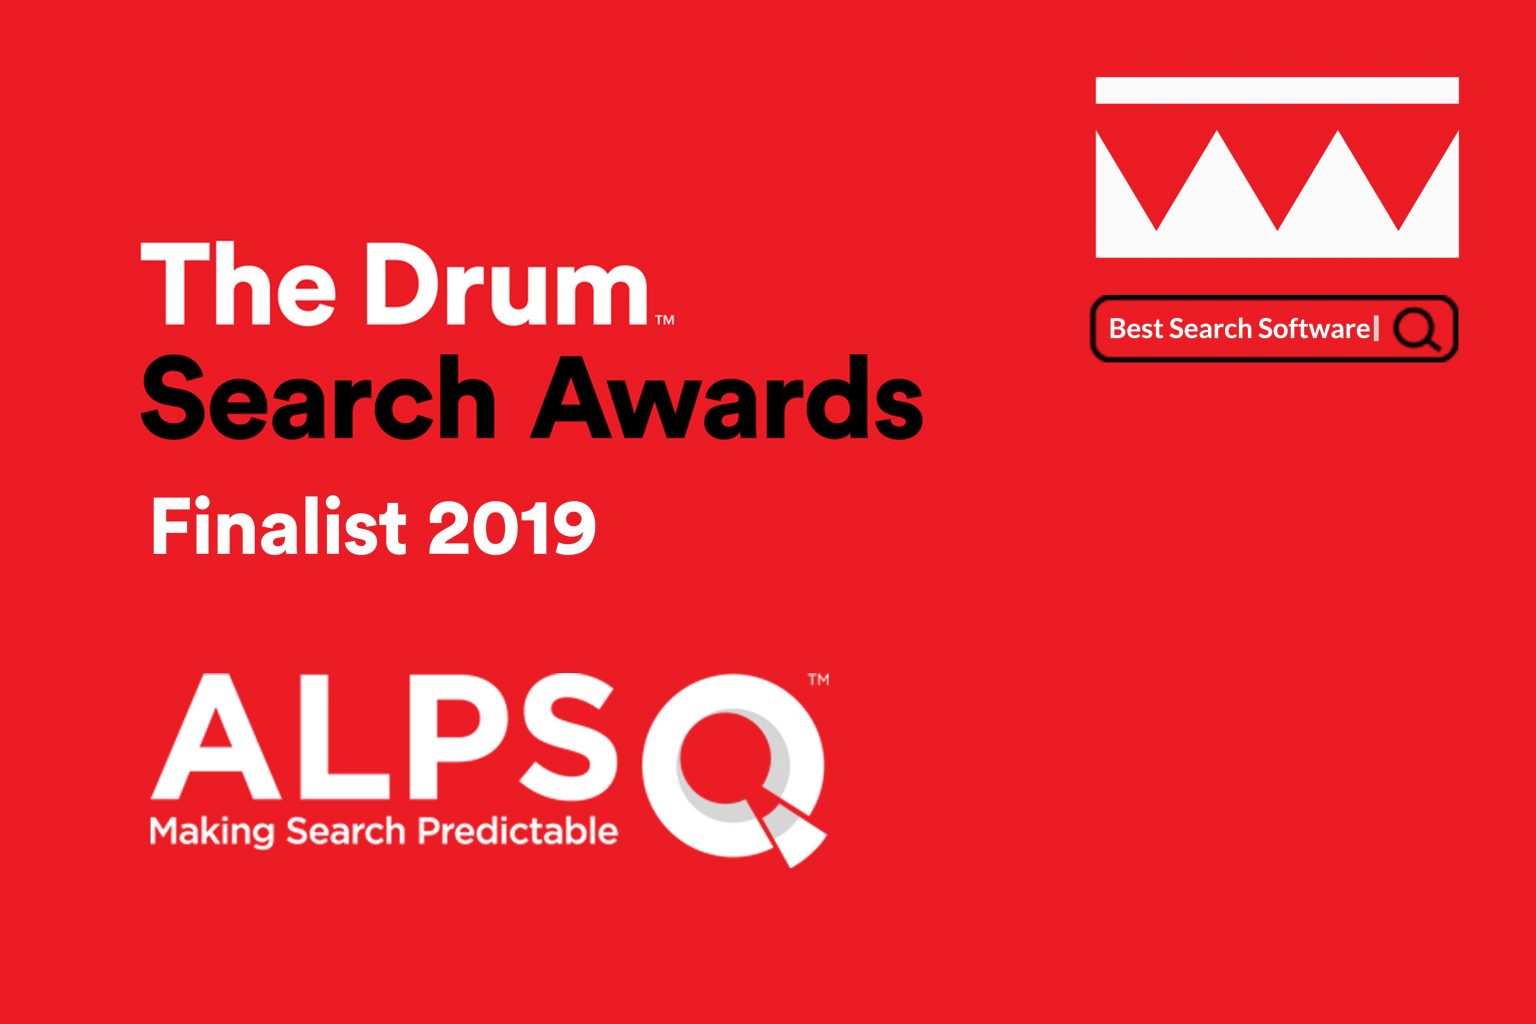 Enterprise SEO tool ALPS - The Drum Search Awards 2019 - iQuanti Digital Marketing Agency